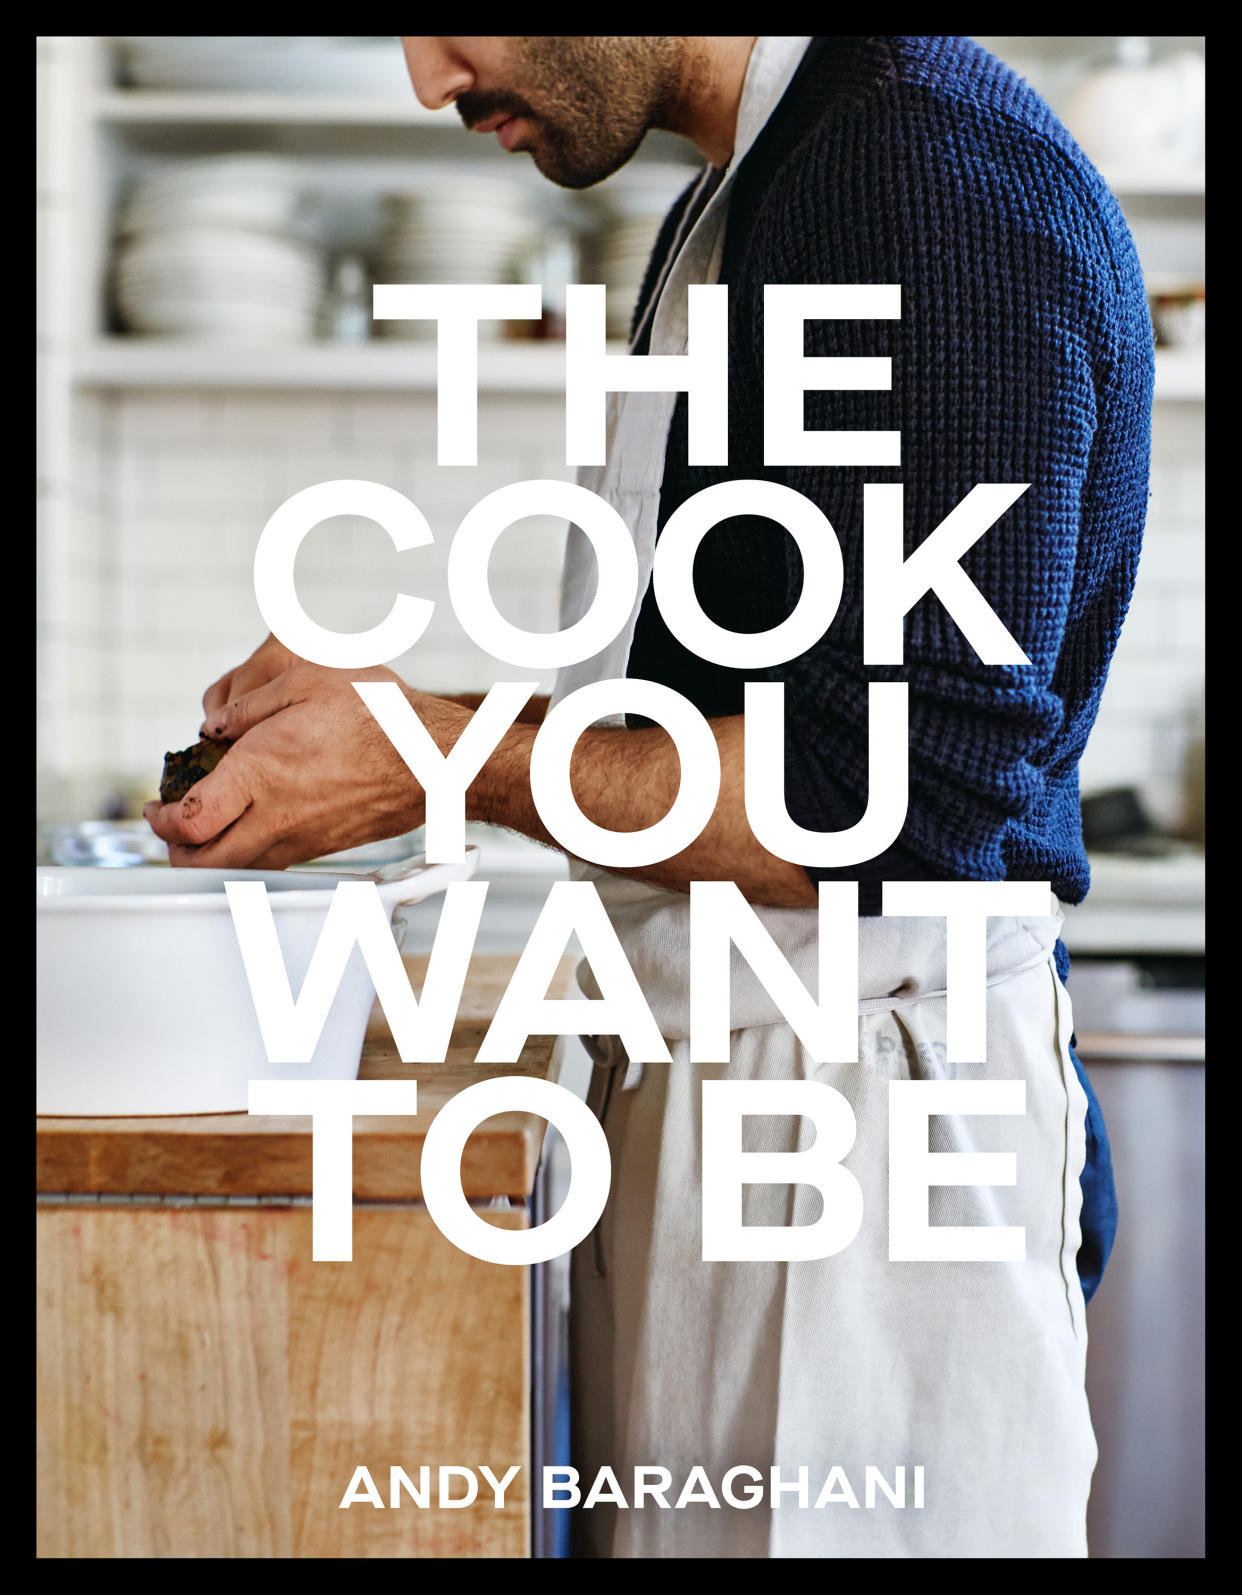 The Cook You Want to Be, Baraghani's debut cookbook, is available now. (Photo: Penguin Random House)